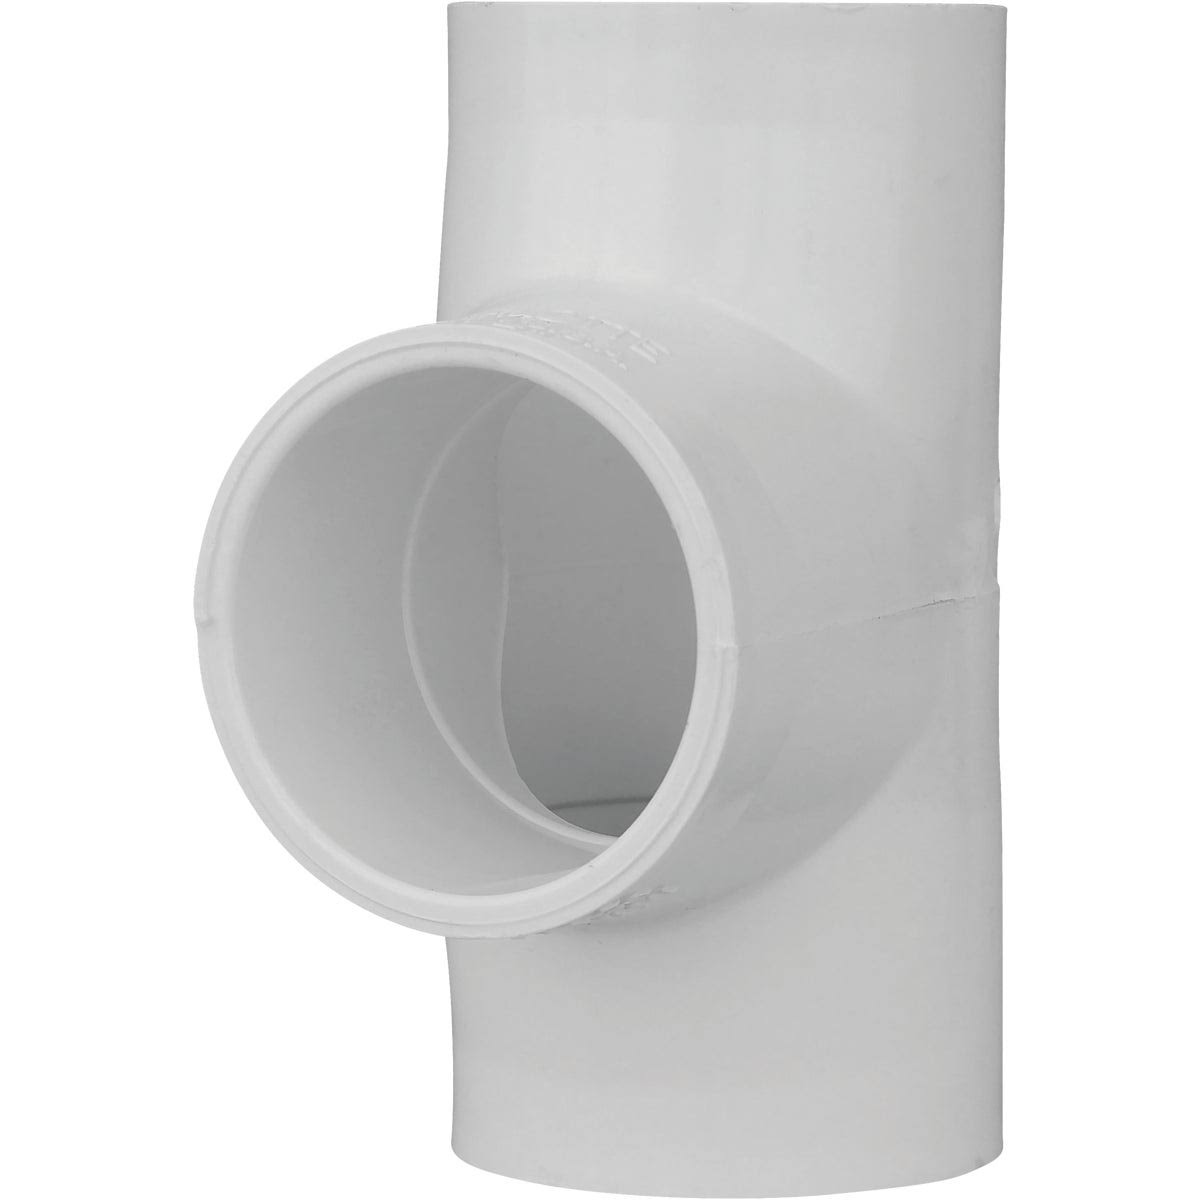 Charlotte Schedule 40 PVC Pipe Tee - White, 1-1/2in